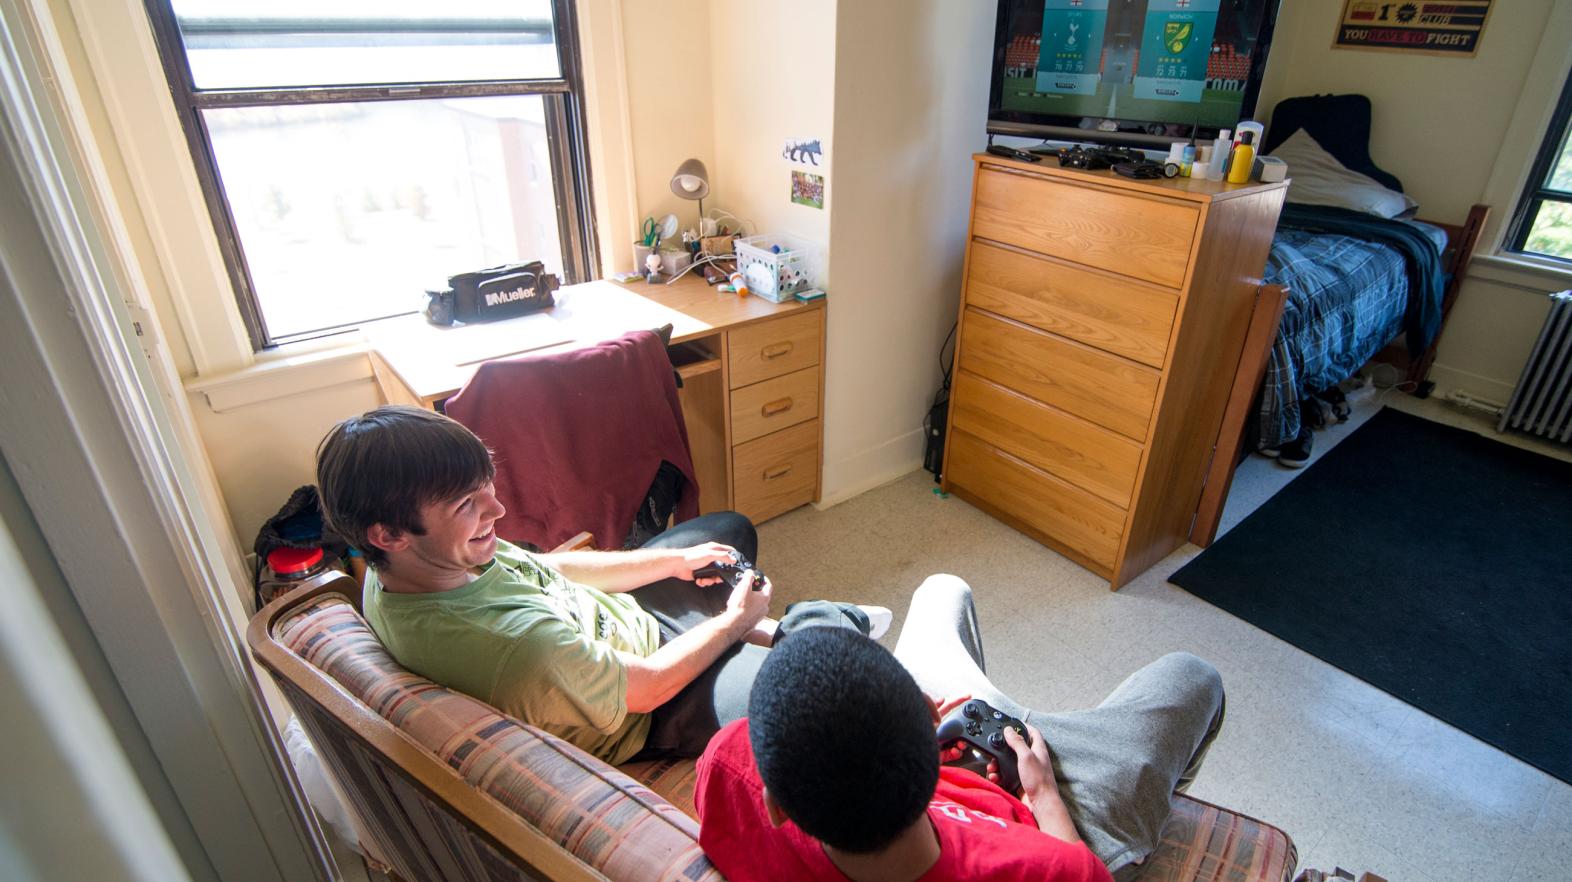 Two students laugh with eachother while playing video games in their residence hall room.